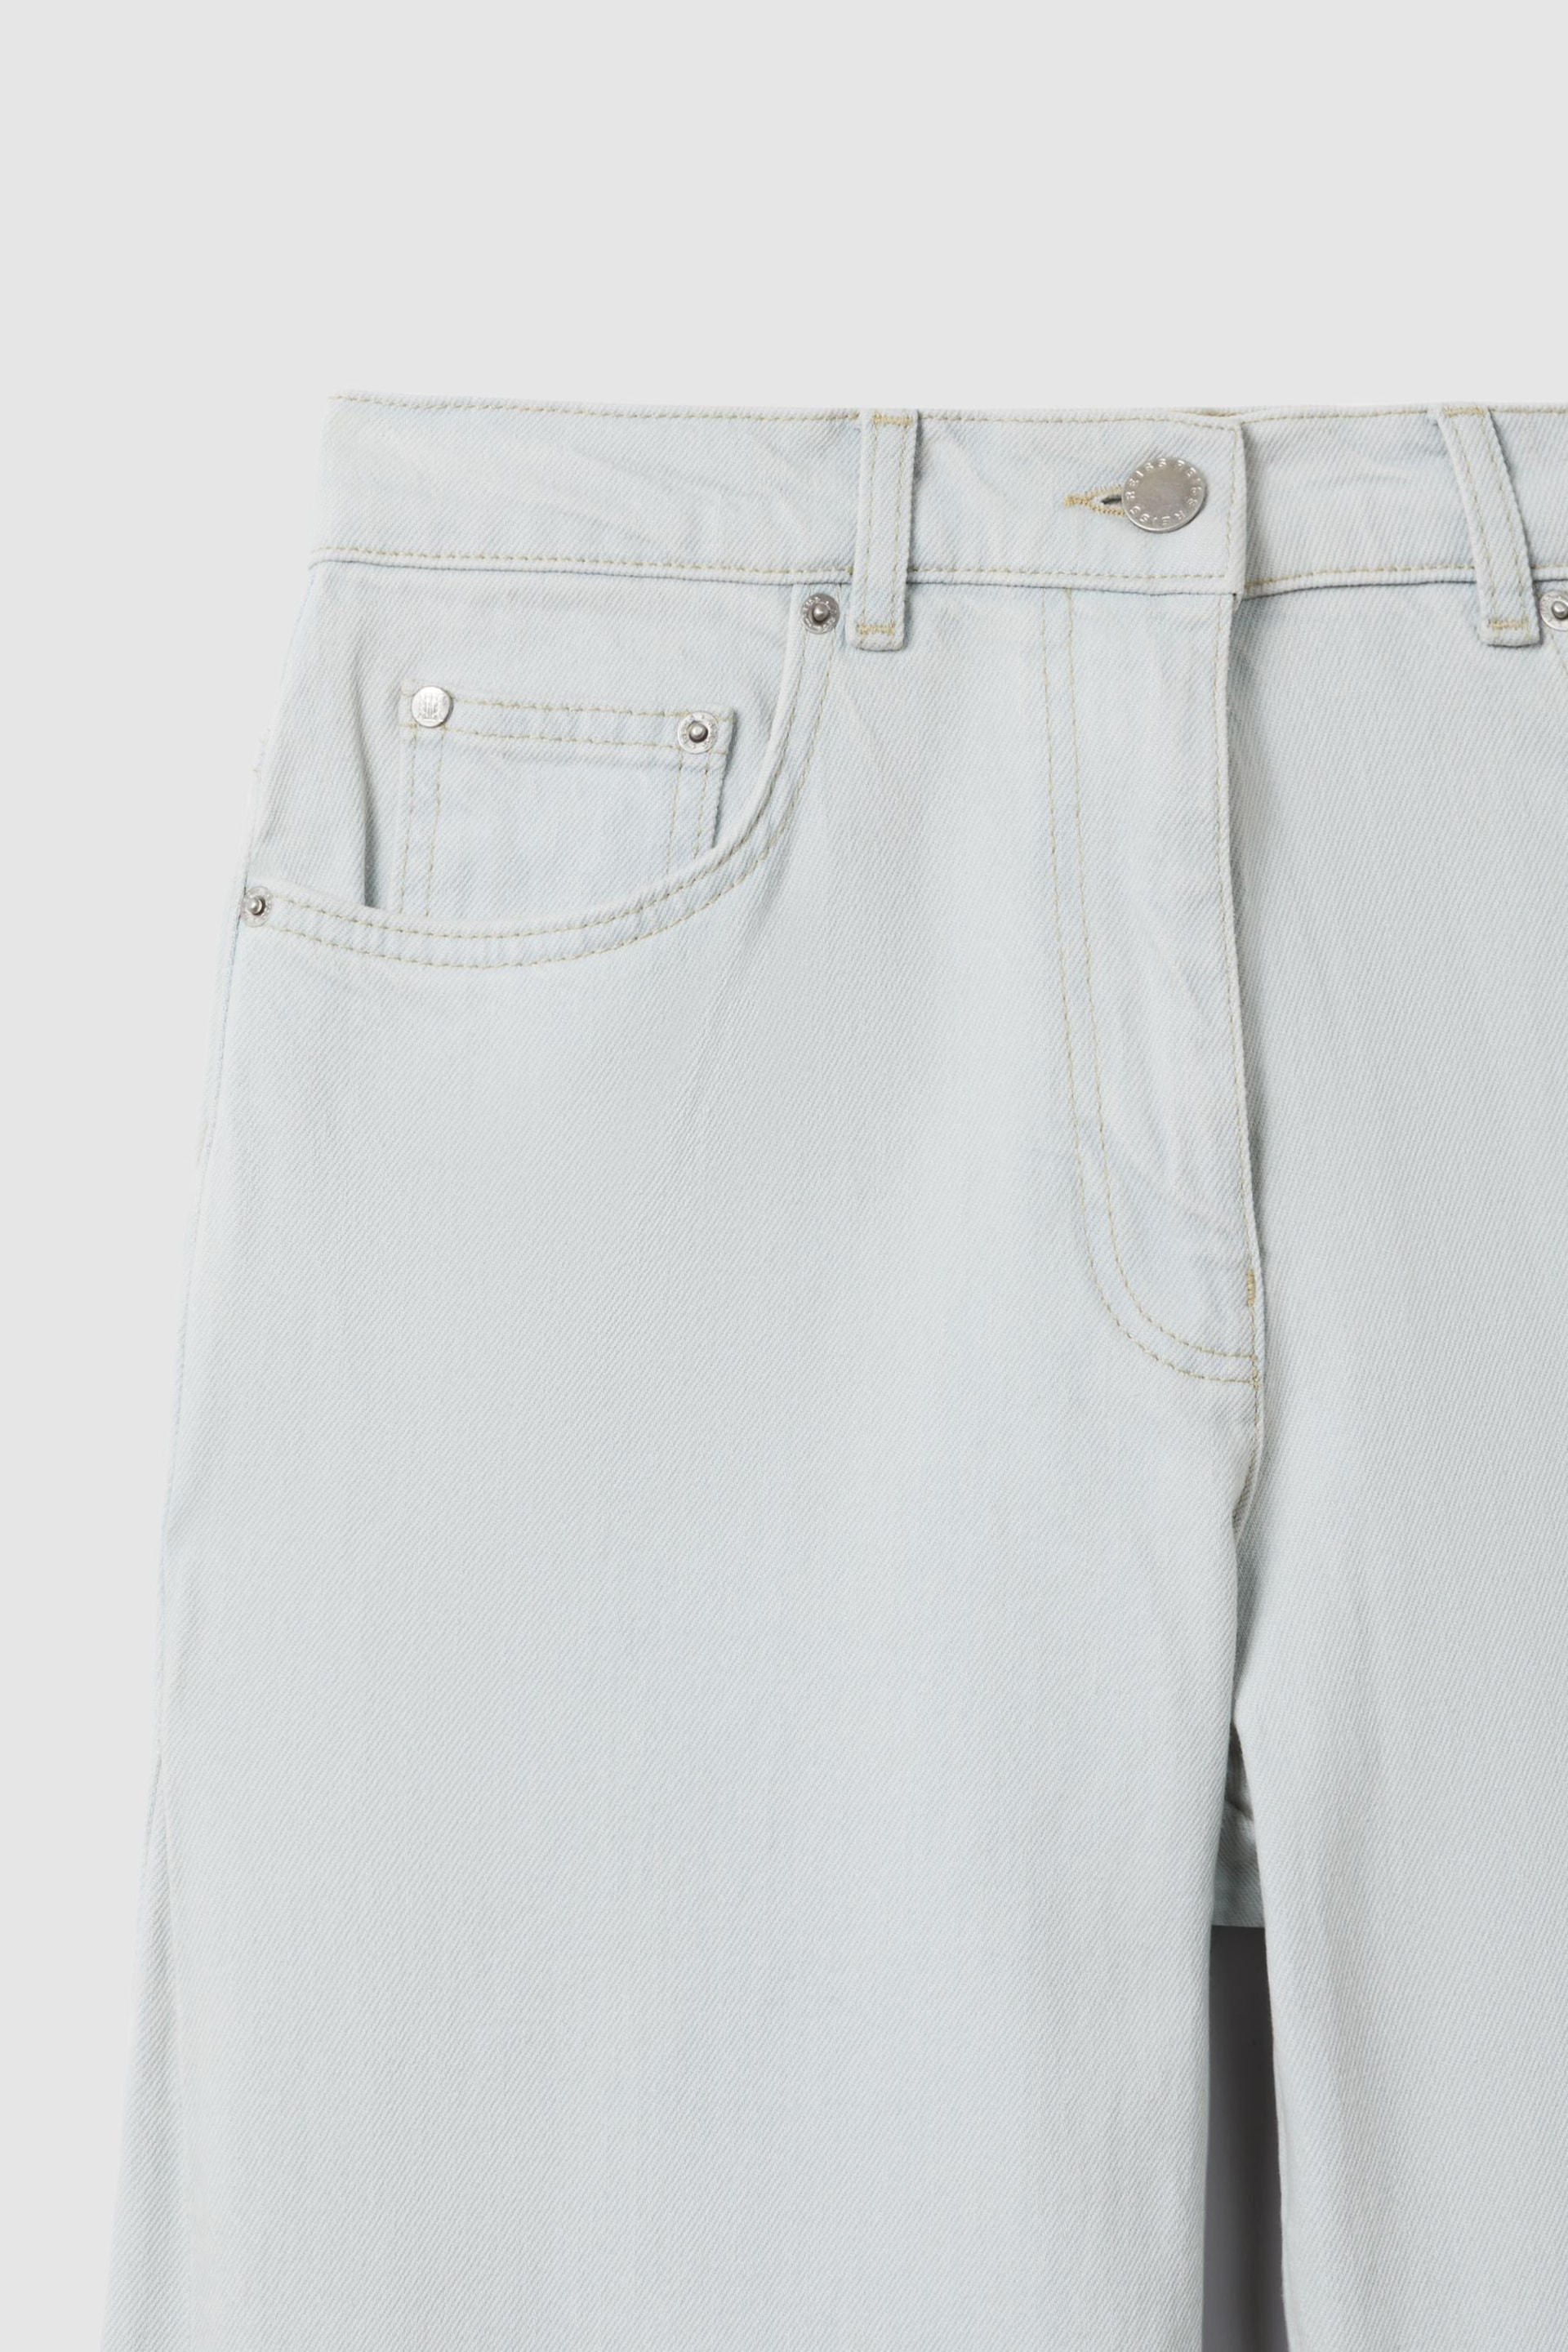 Reiss Light Blue Maize Flared Side Seam Jeans - Image 5 of 5